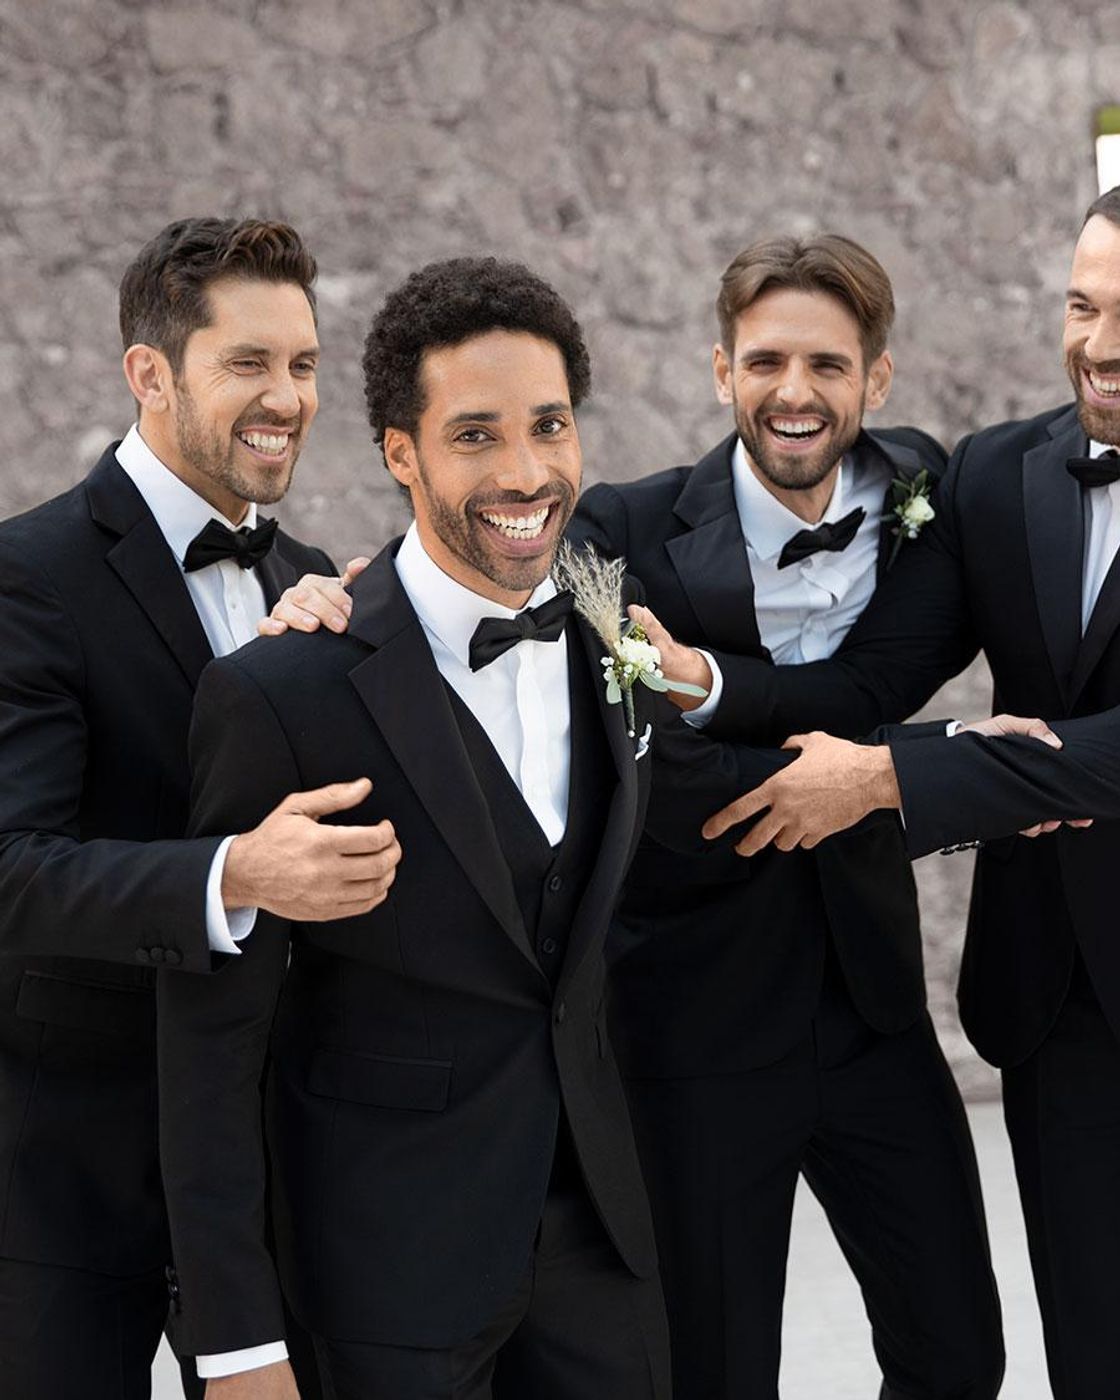 The Groomsmen Guide: How Many Groomsmen Should You Have?